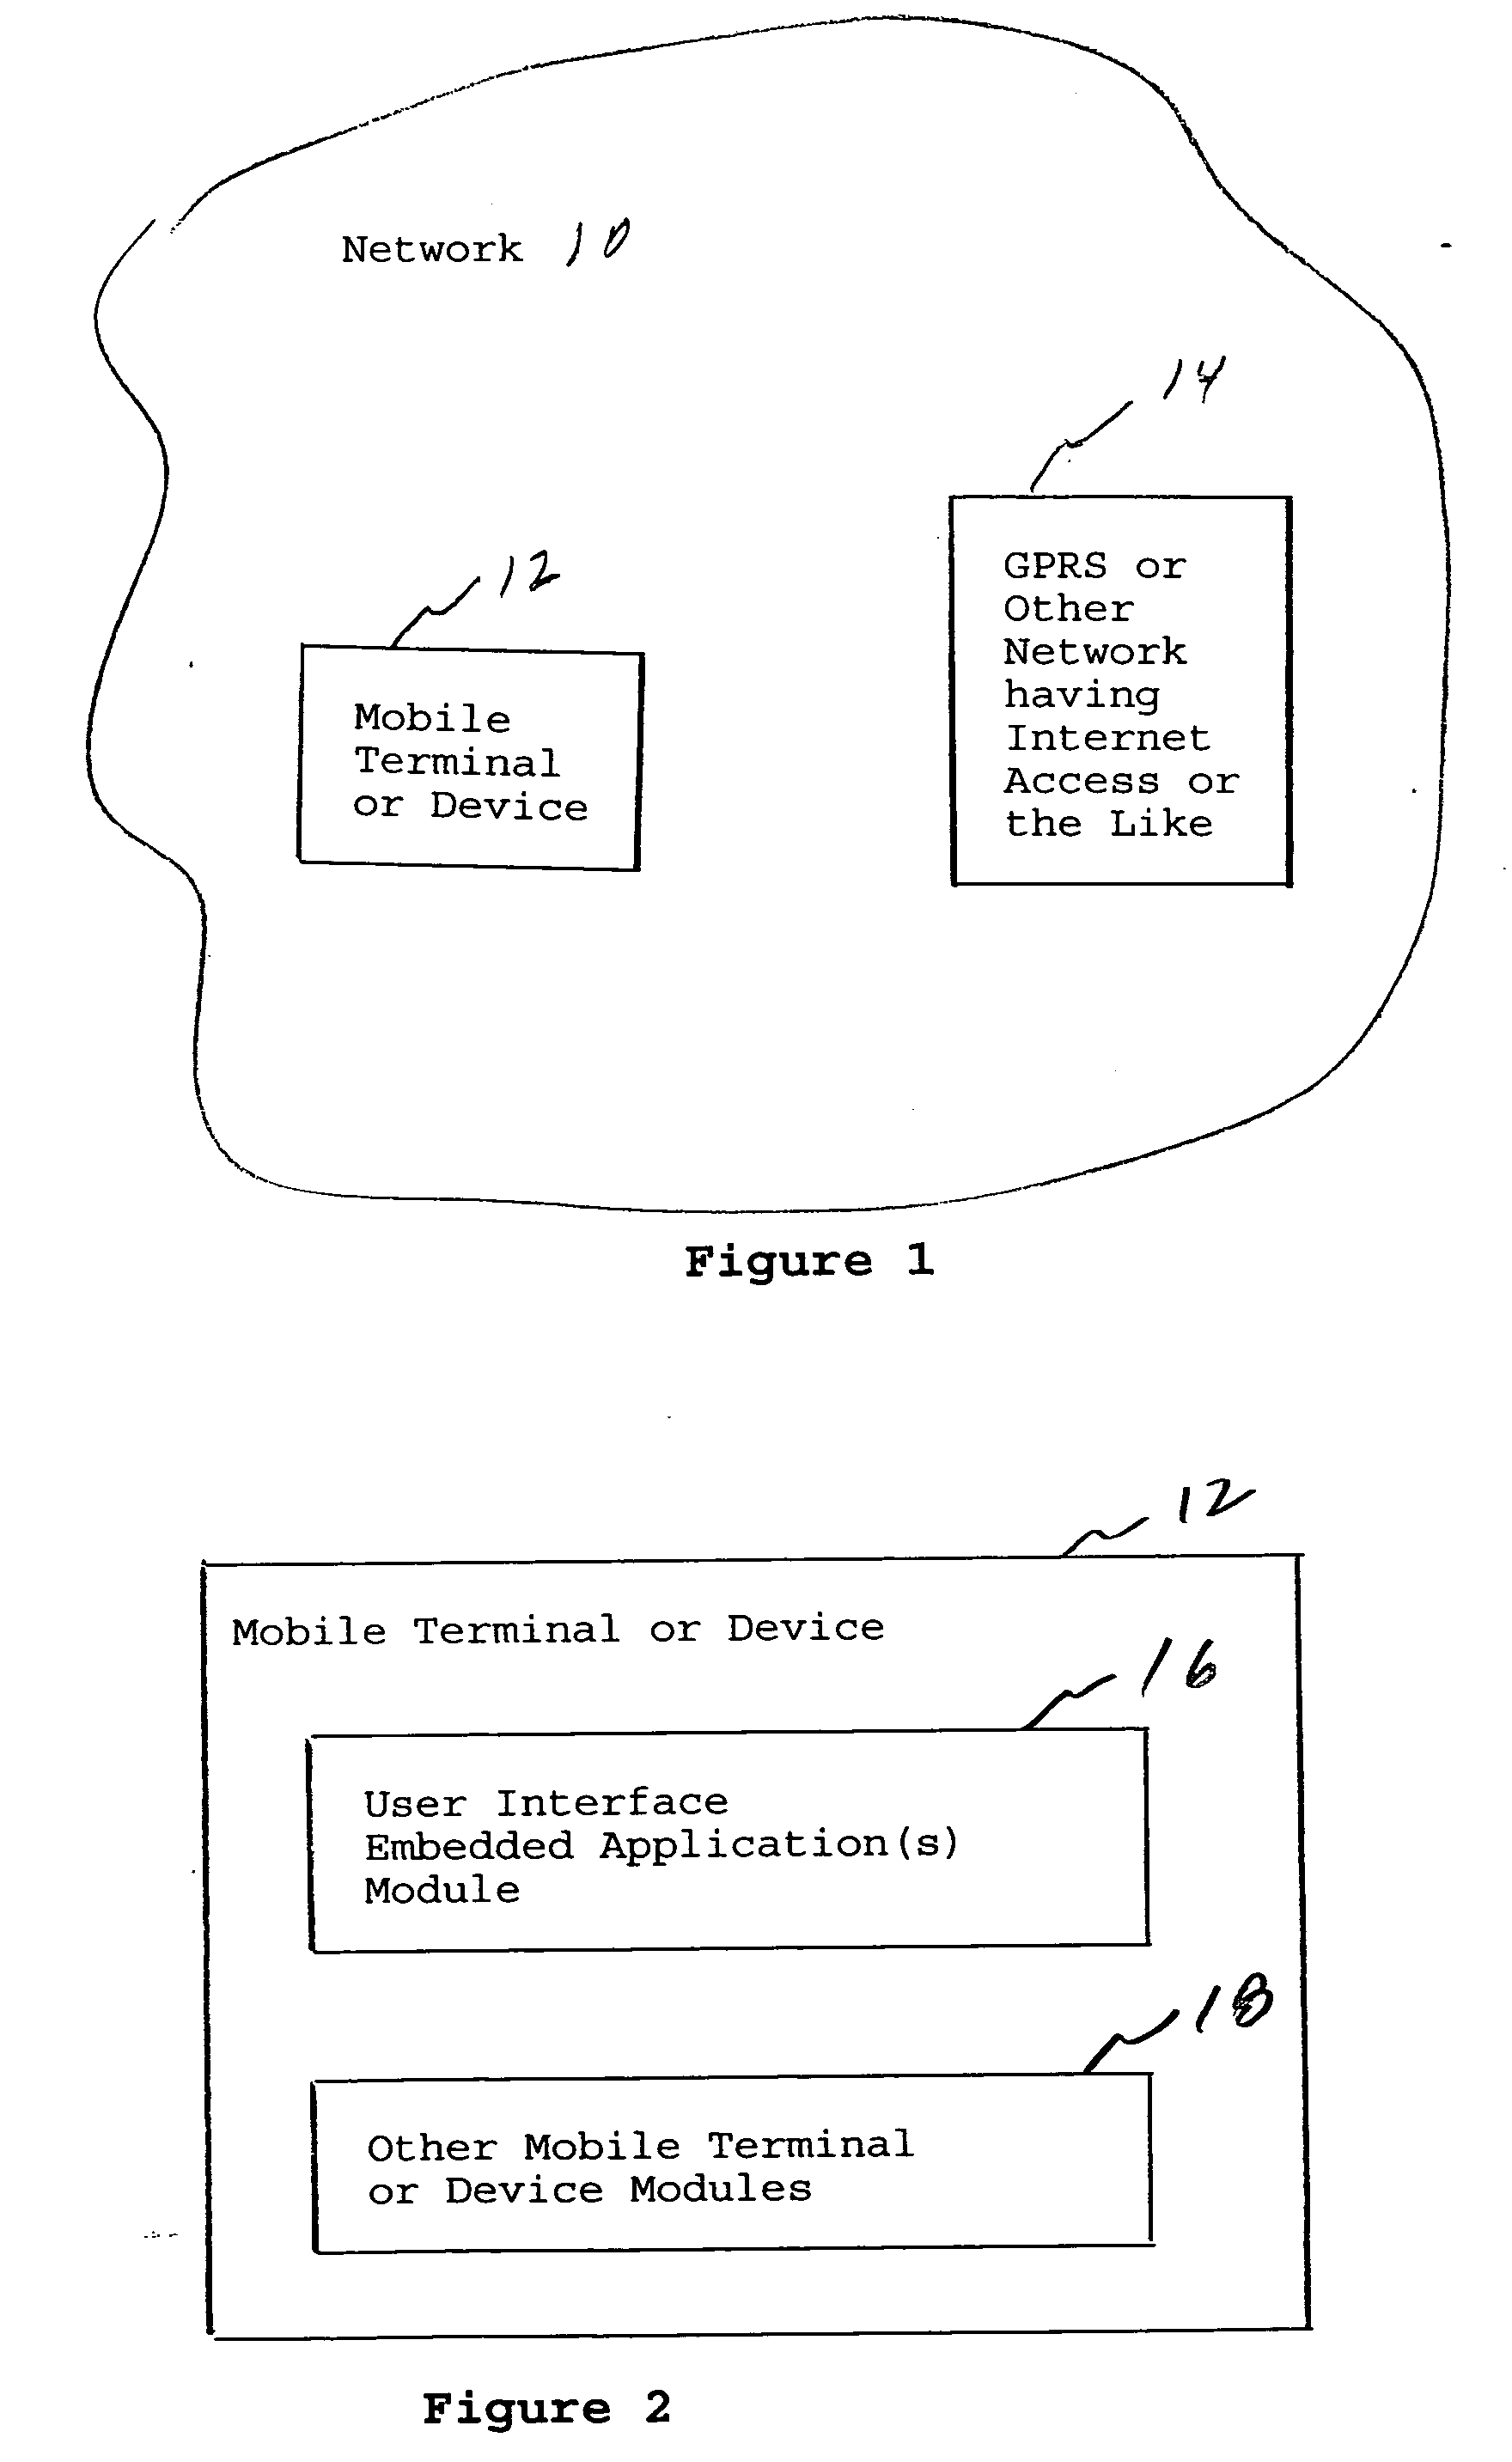 Method and apparatus for displaying user interface embedded applications on a mobile terminal or device